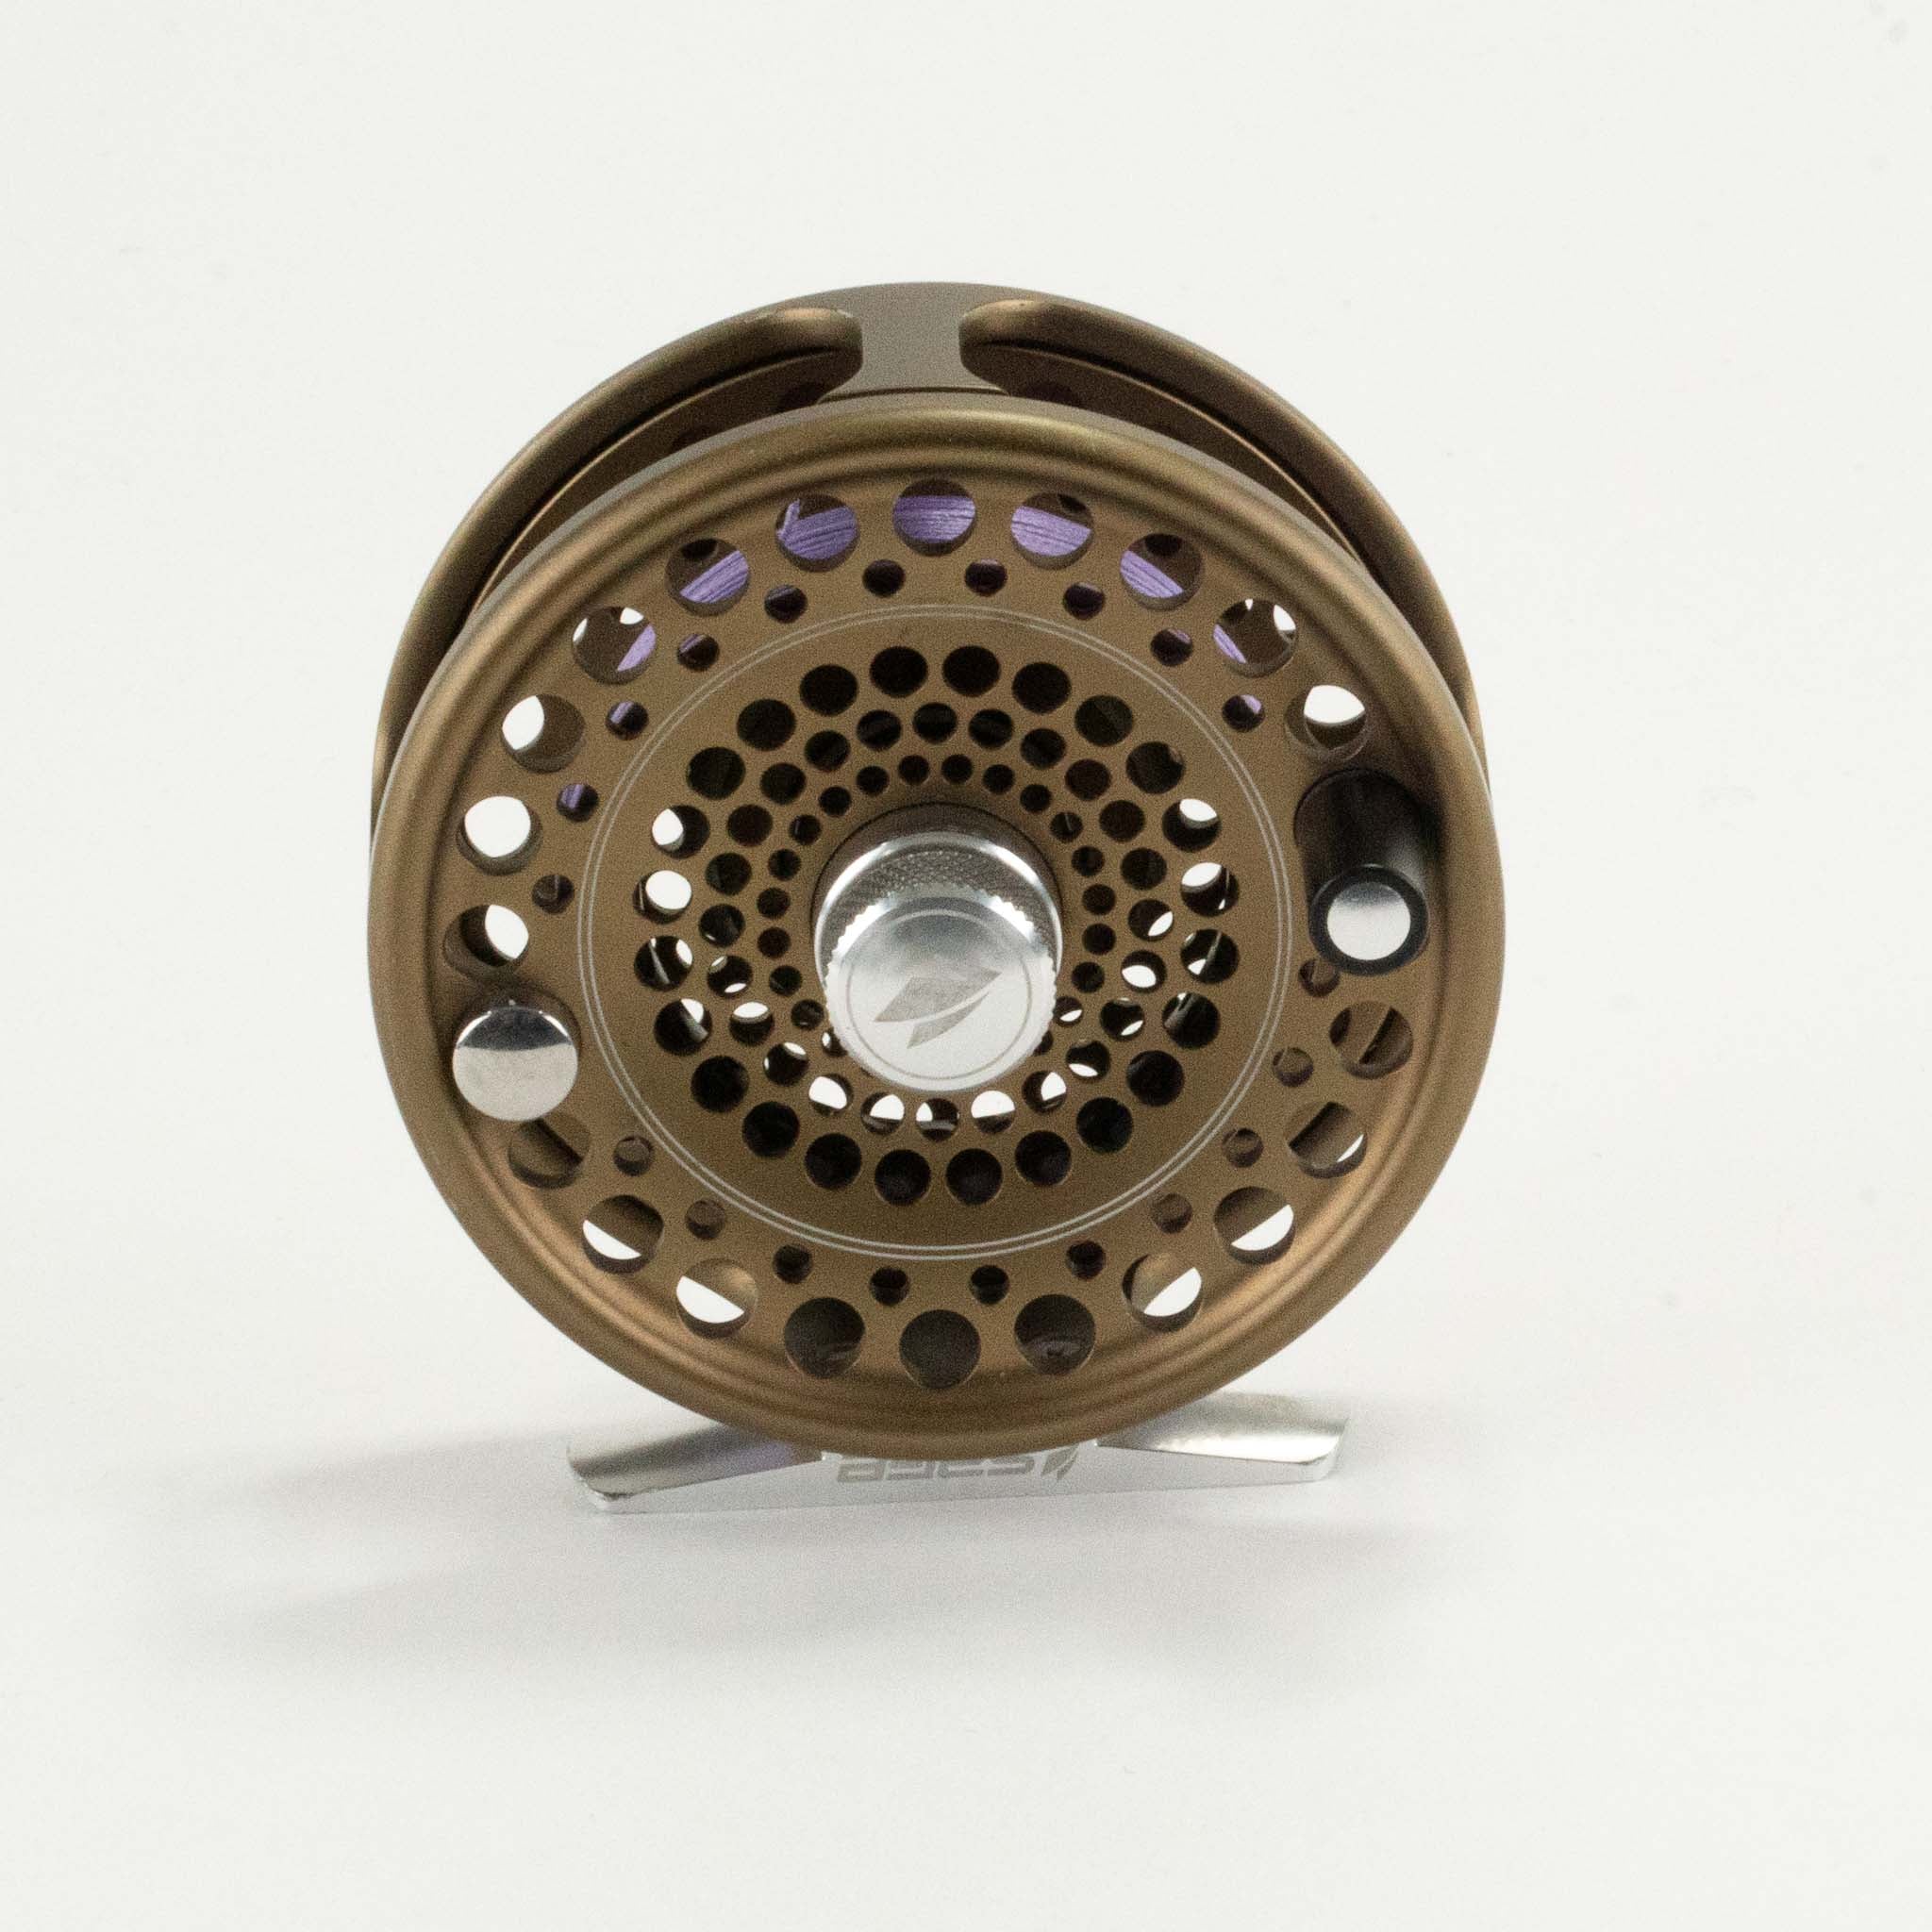 ORVIS C.F.O. II 2 7/8″ TROUT FLY REEL – Vintage Fishing Tackle